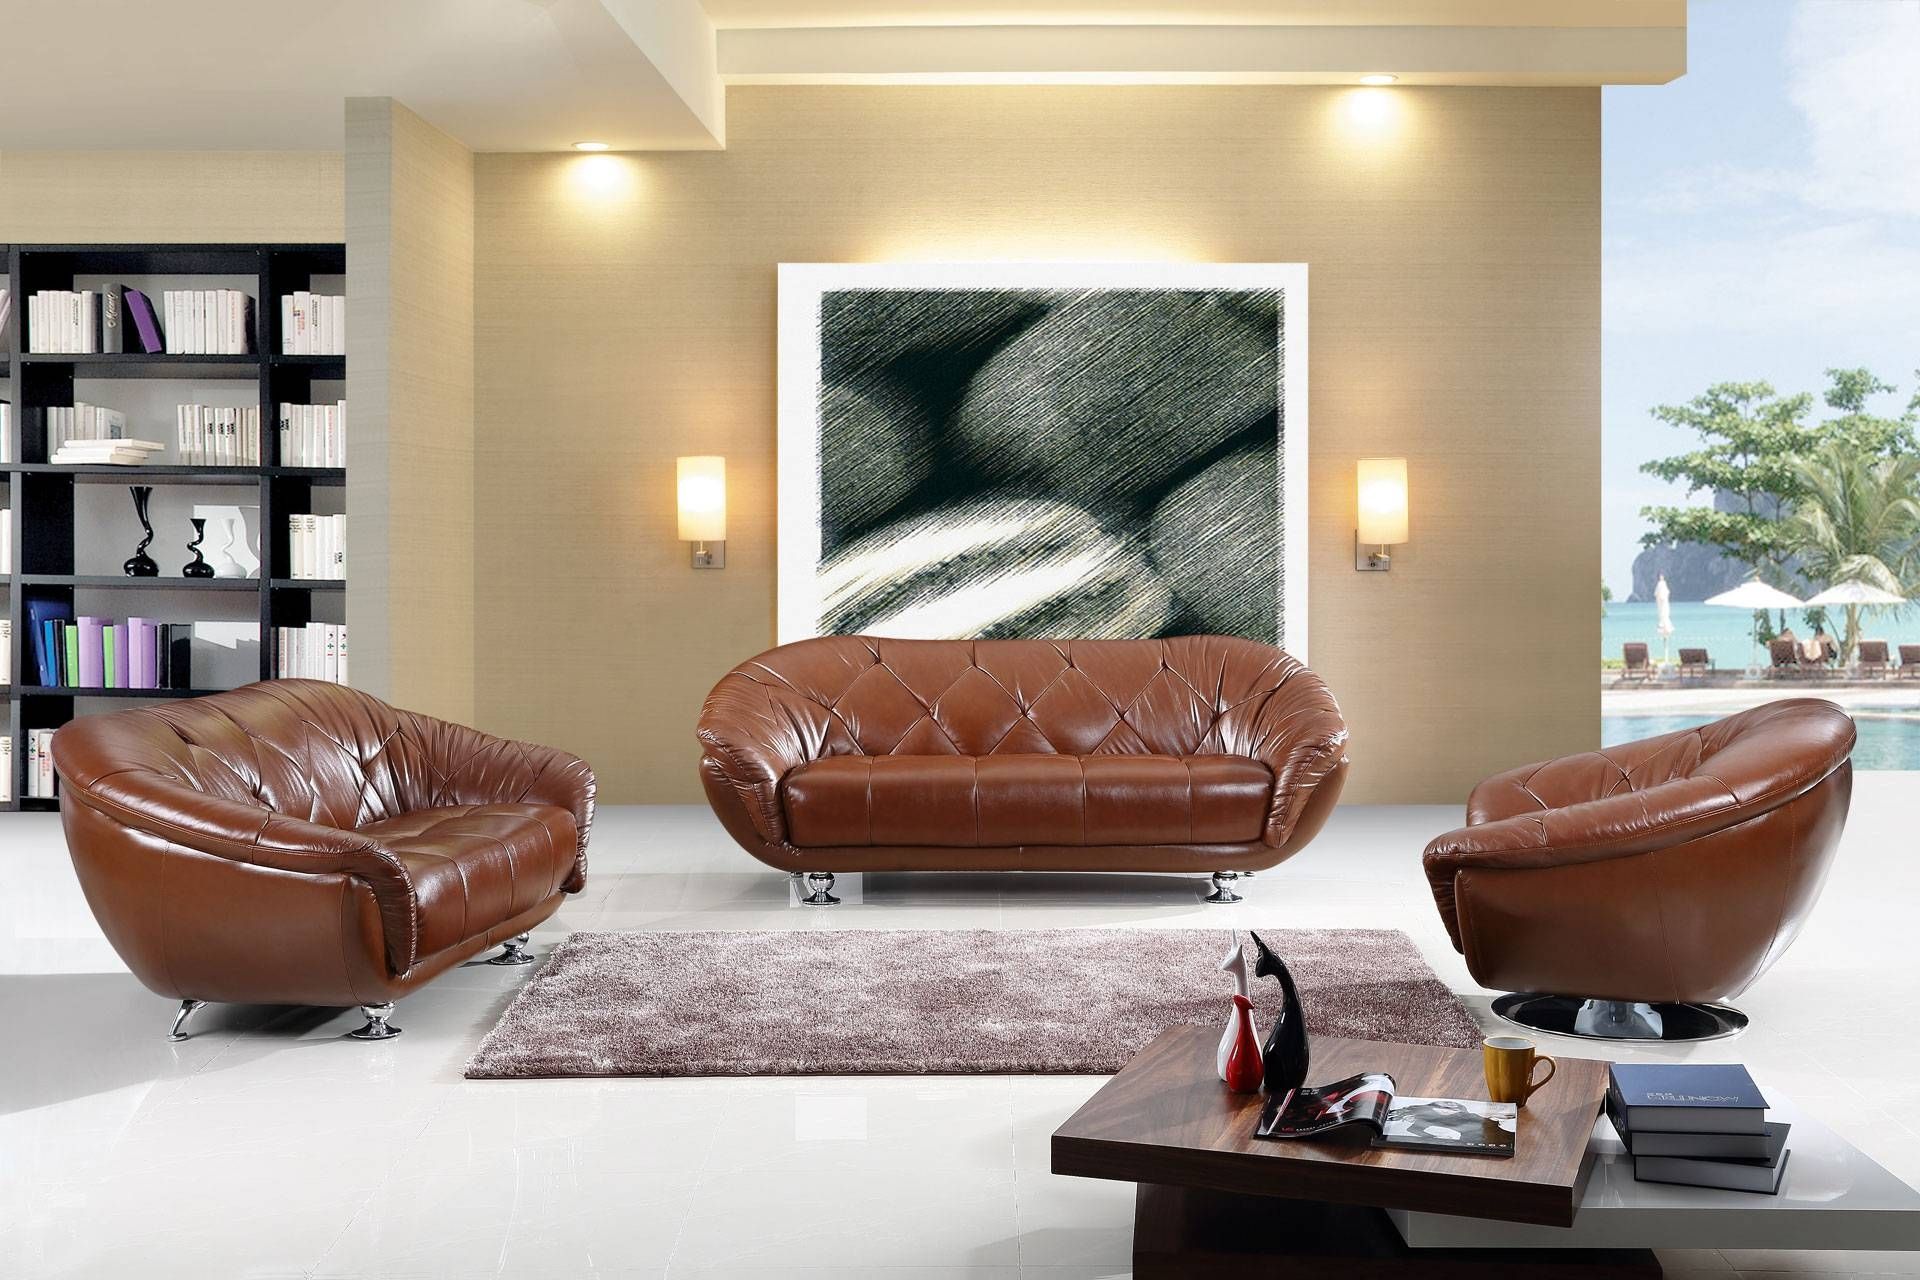 Interior Design: Marvellous Modern Living Room Decorating Ideas For Sofas With Lights (View 13 of 30)